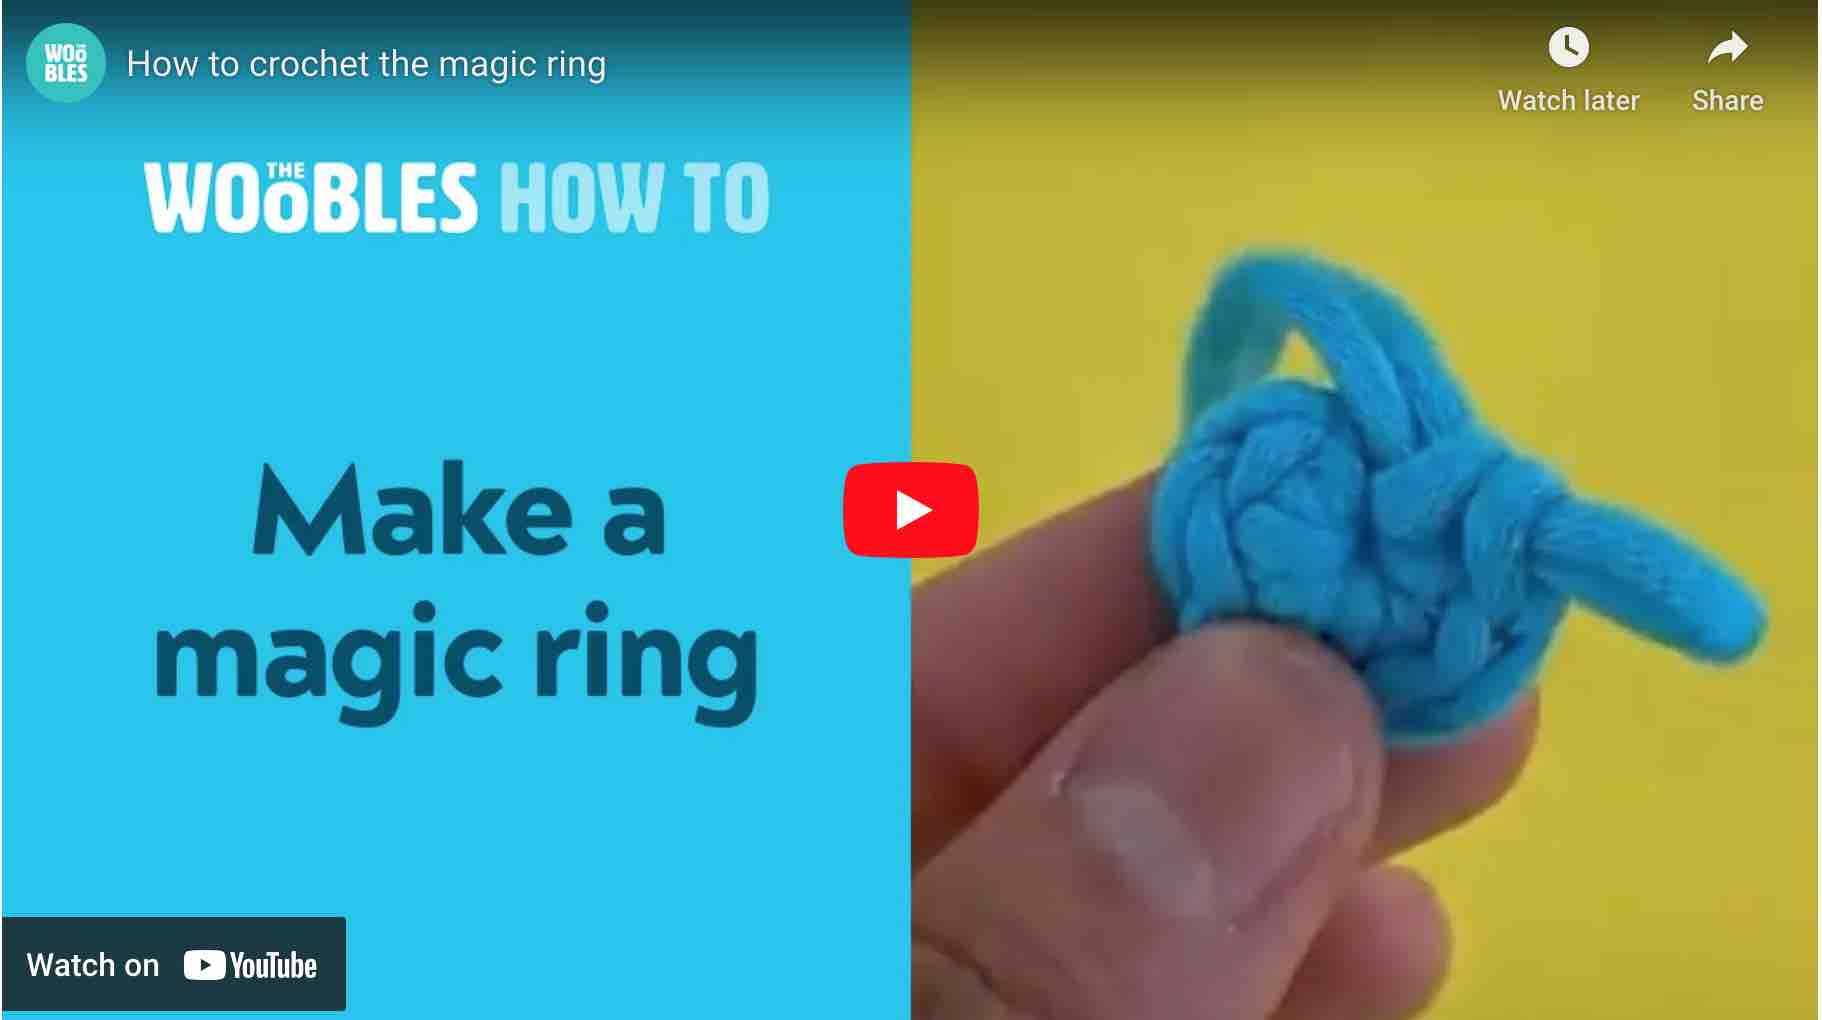 How to crochet magic ring The Woobles